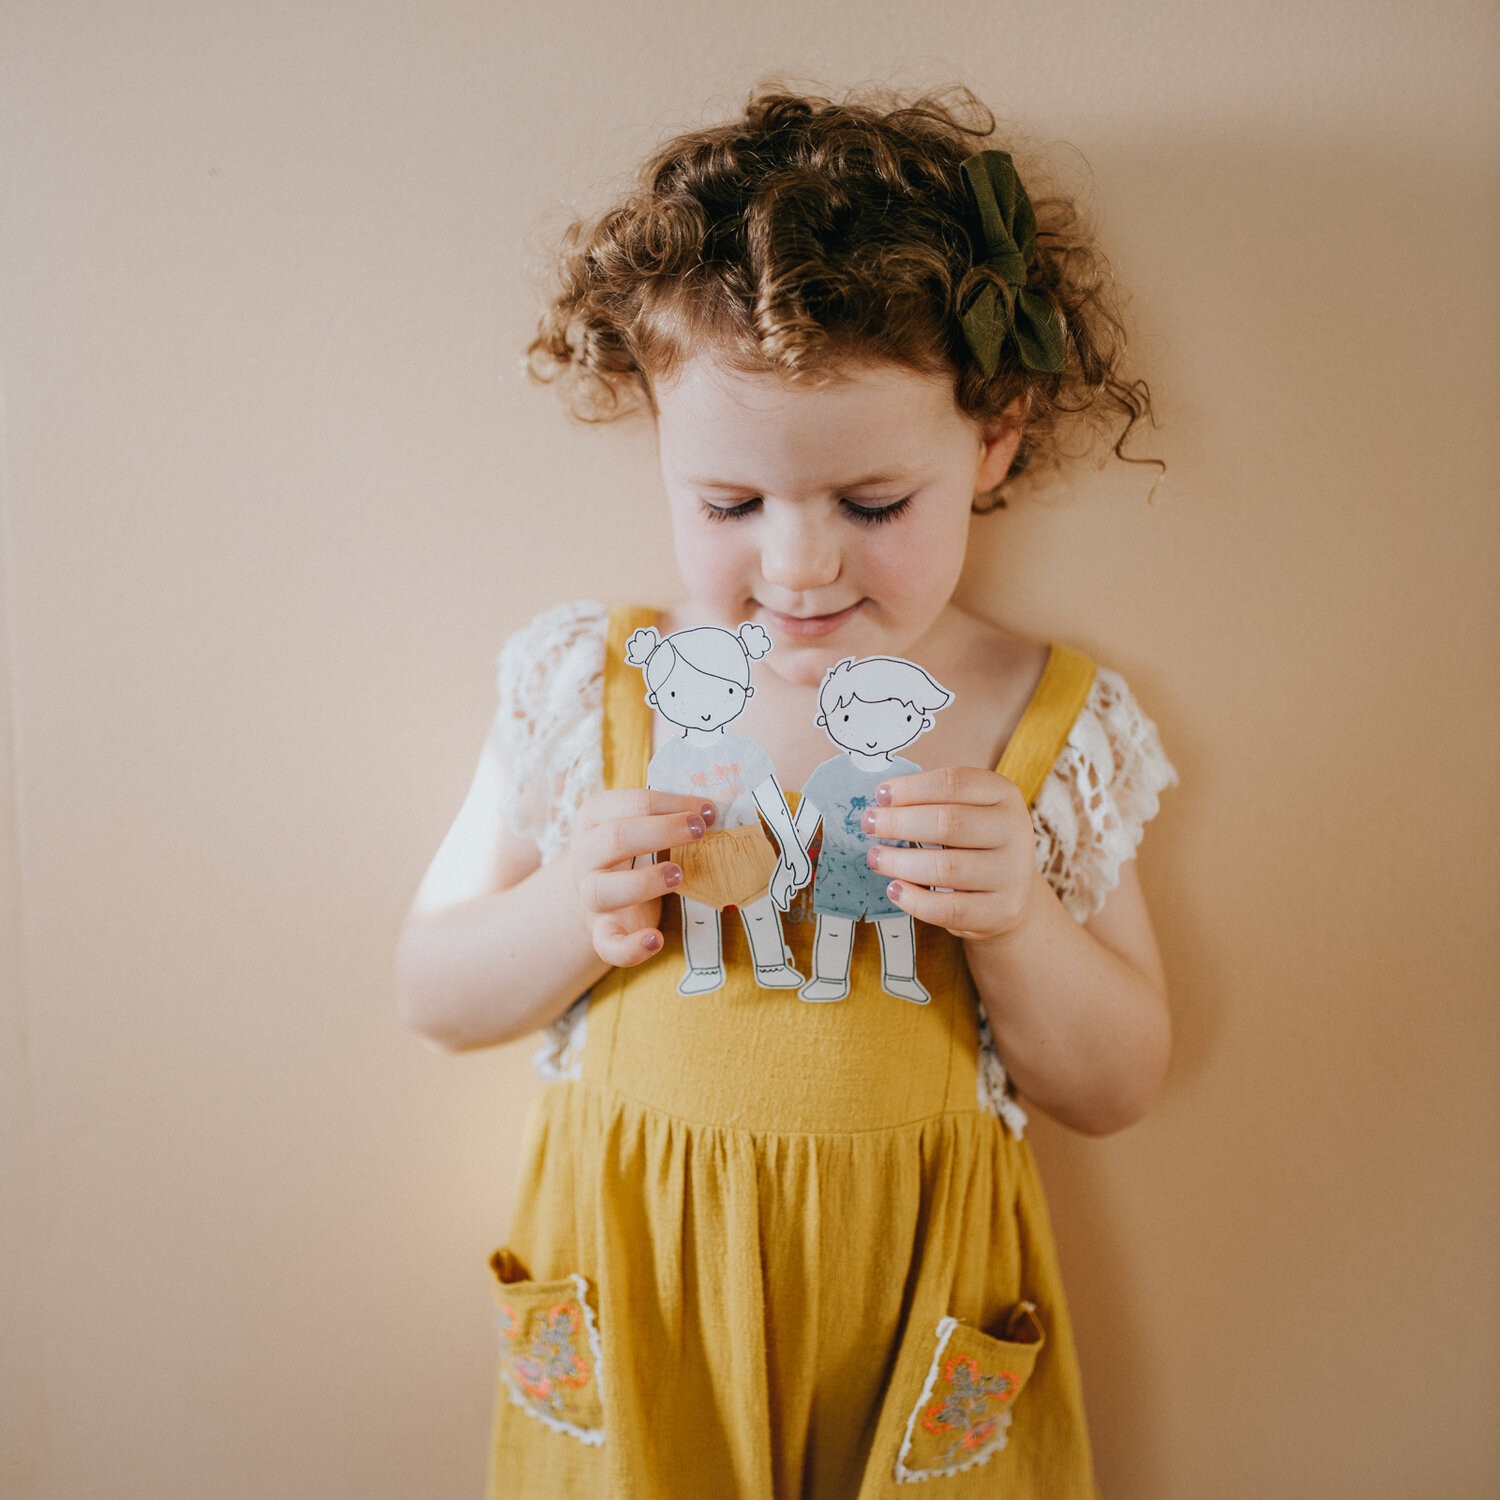 A little girl holds up two paper dolls with paper clothes.